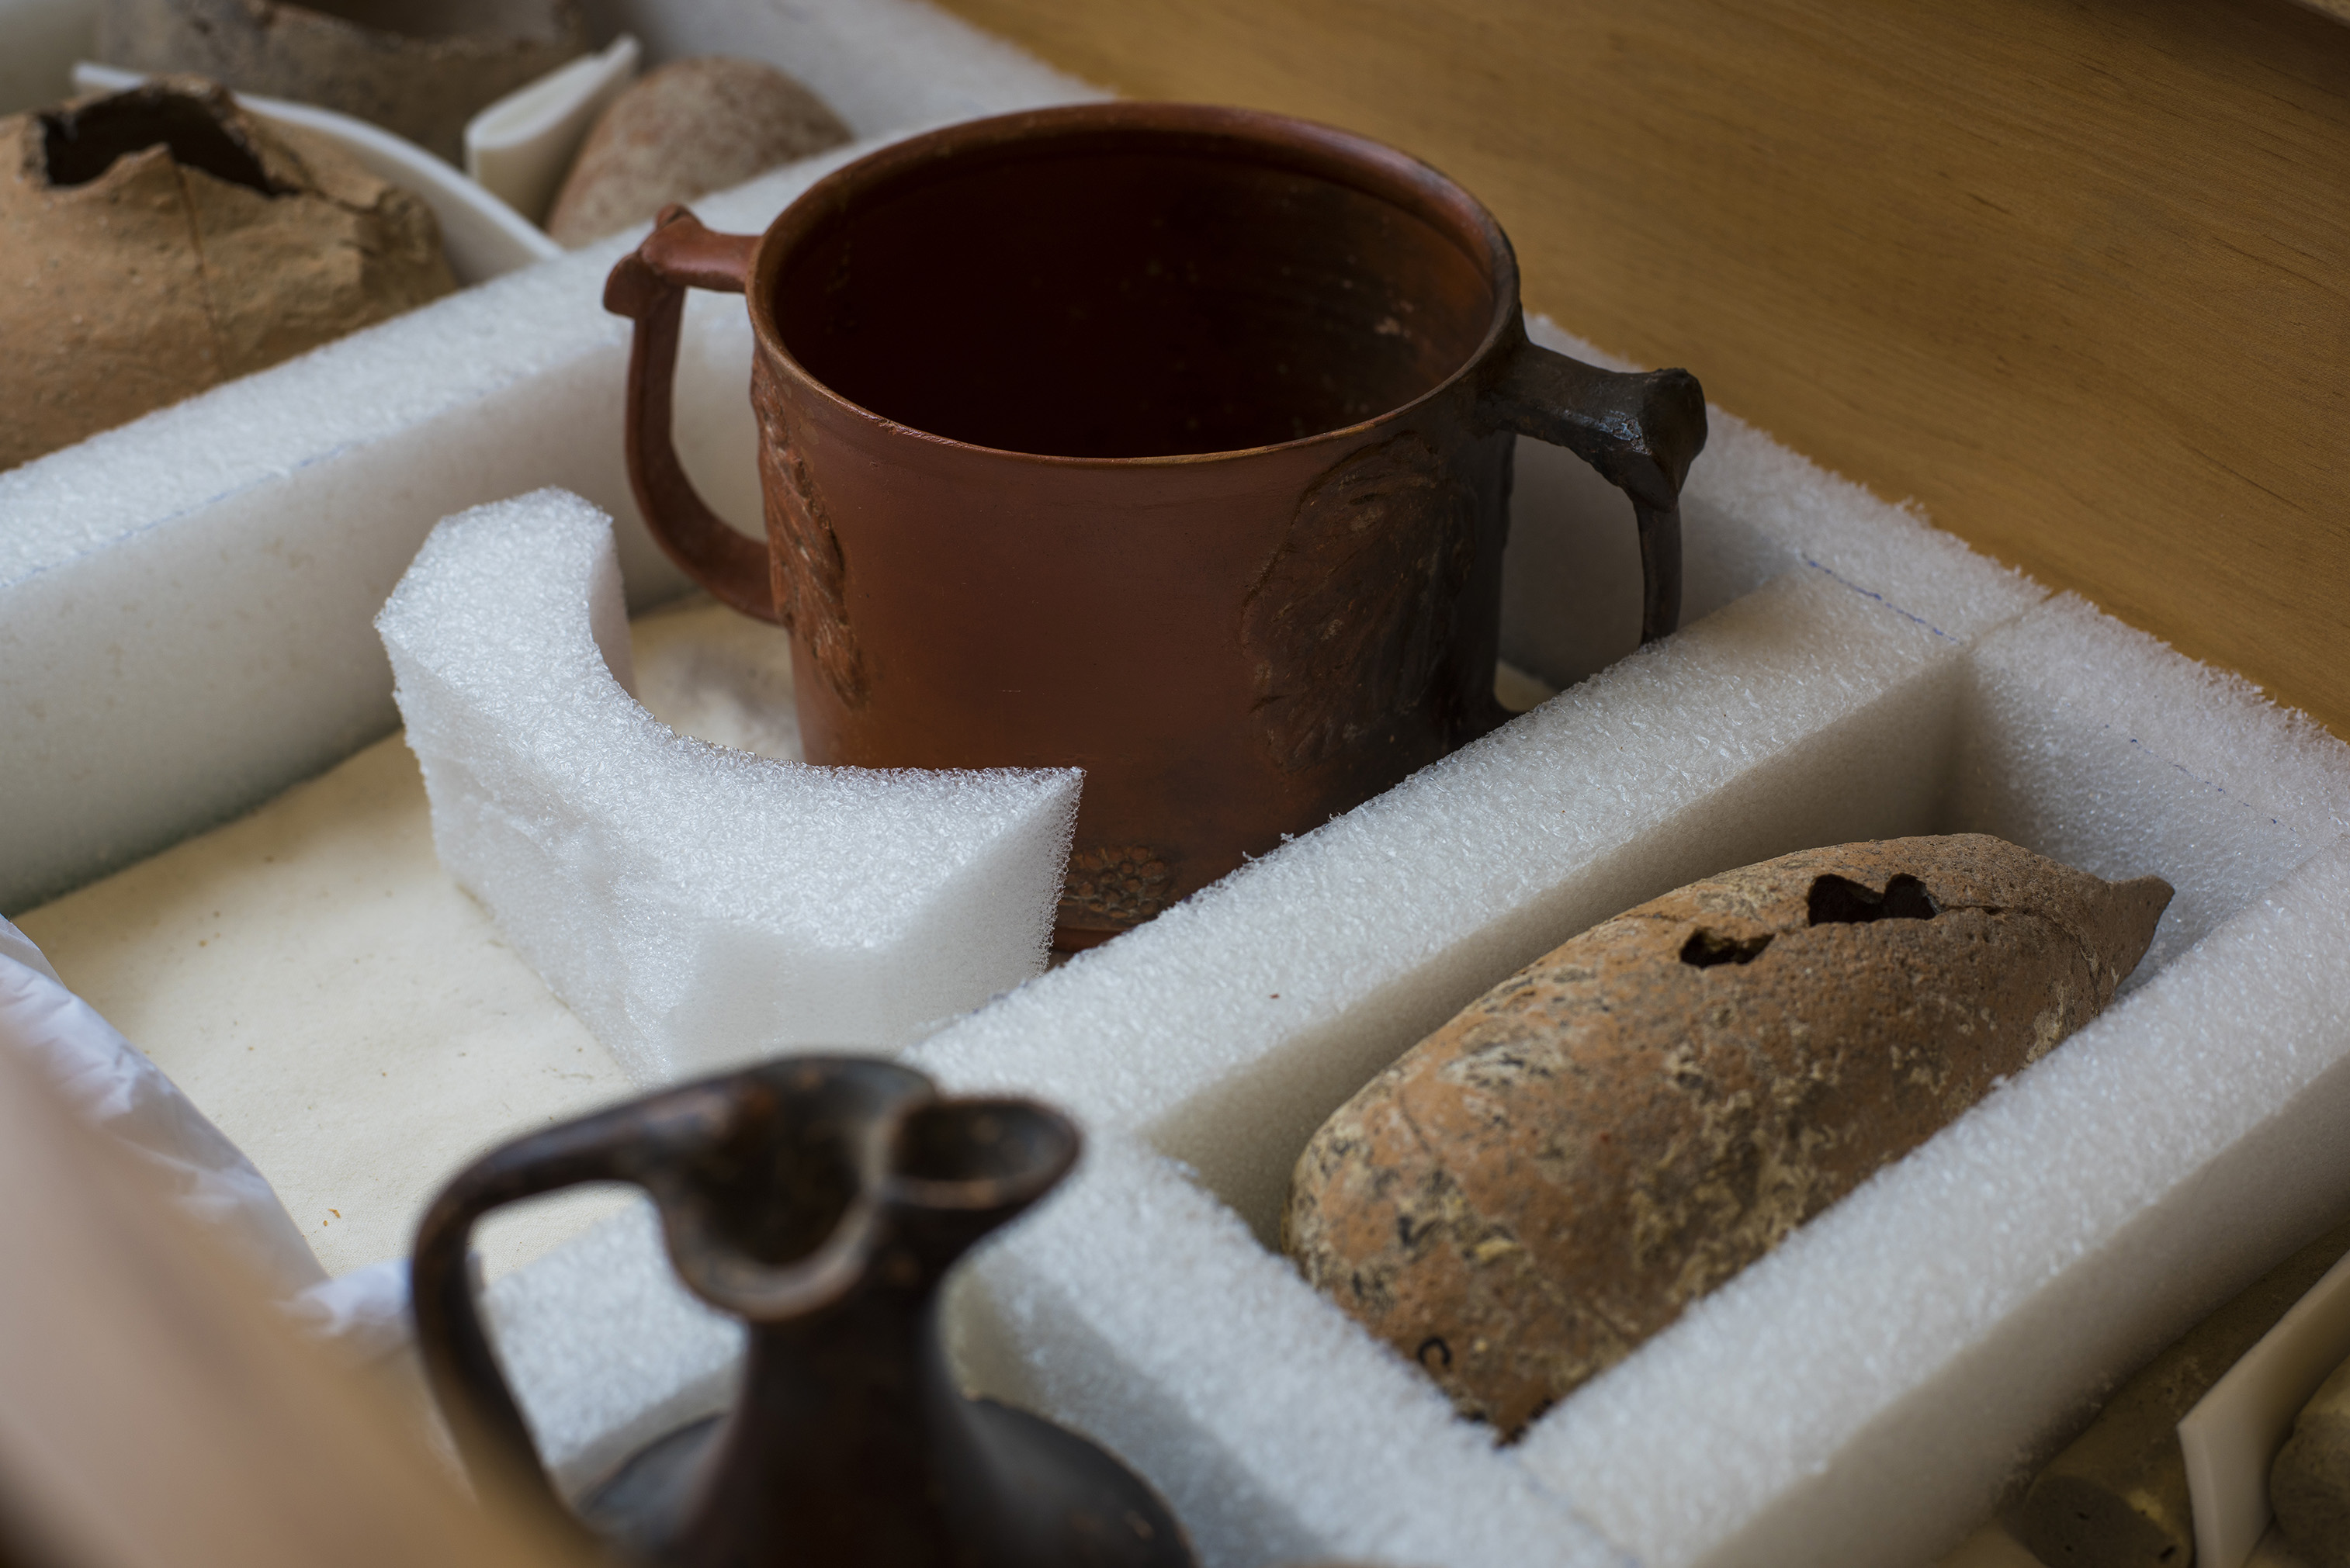 A red-brown, two-handled vessel sits nestled between foam pieces, surrounded by other small fragmented vessels.